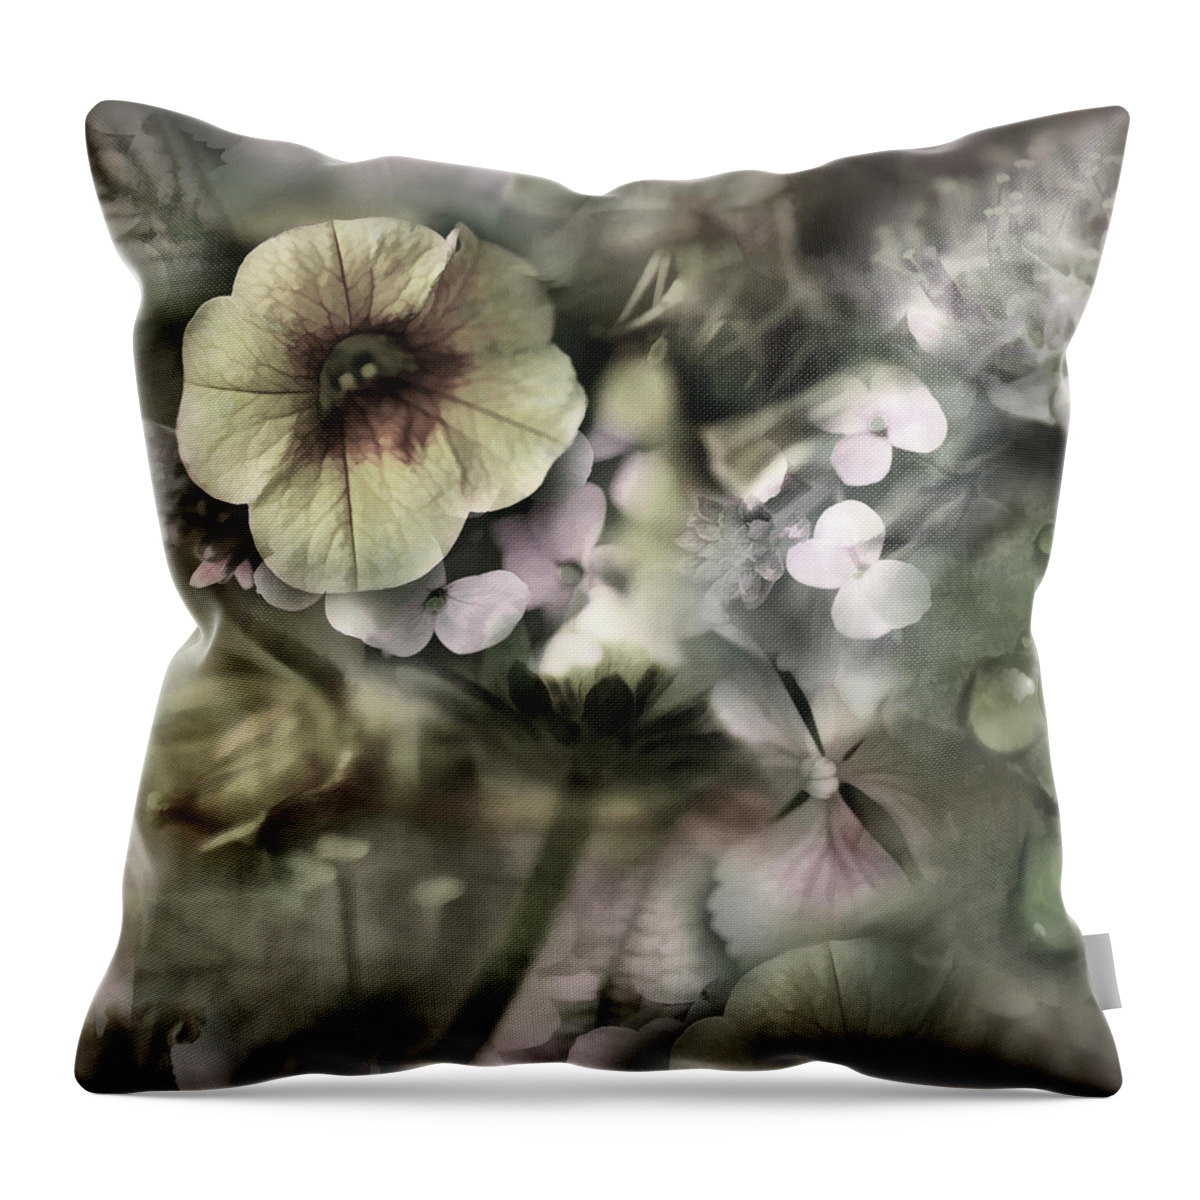 Floral Art Throw Pillow featuring the photograph Floral Montage by Bonnie Bruno